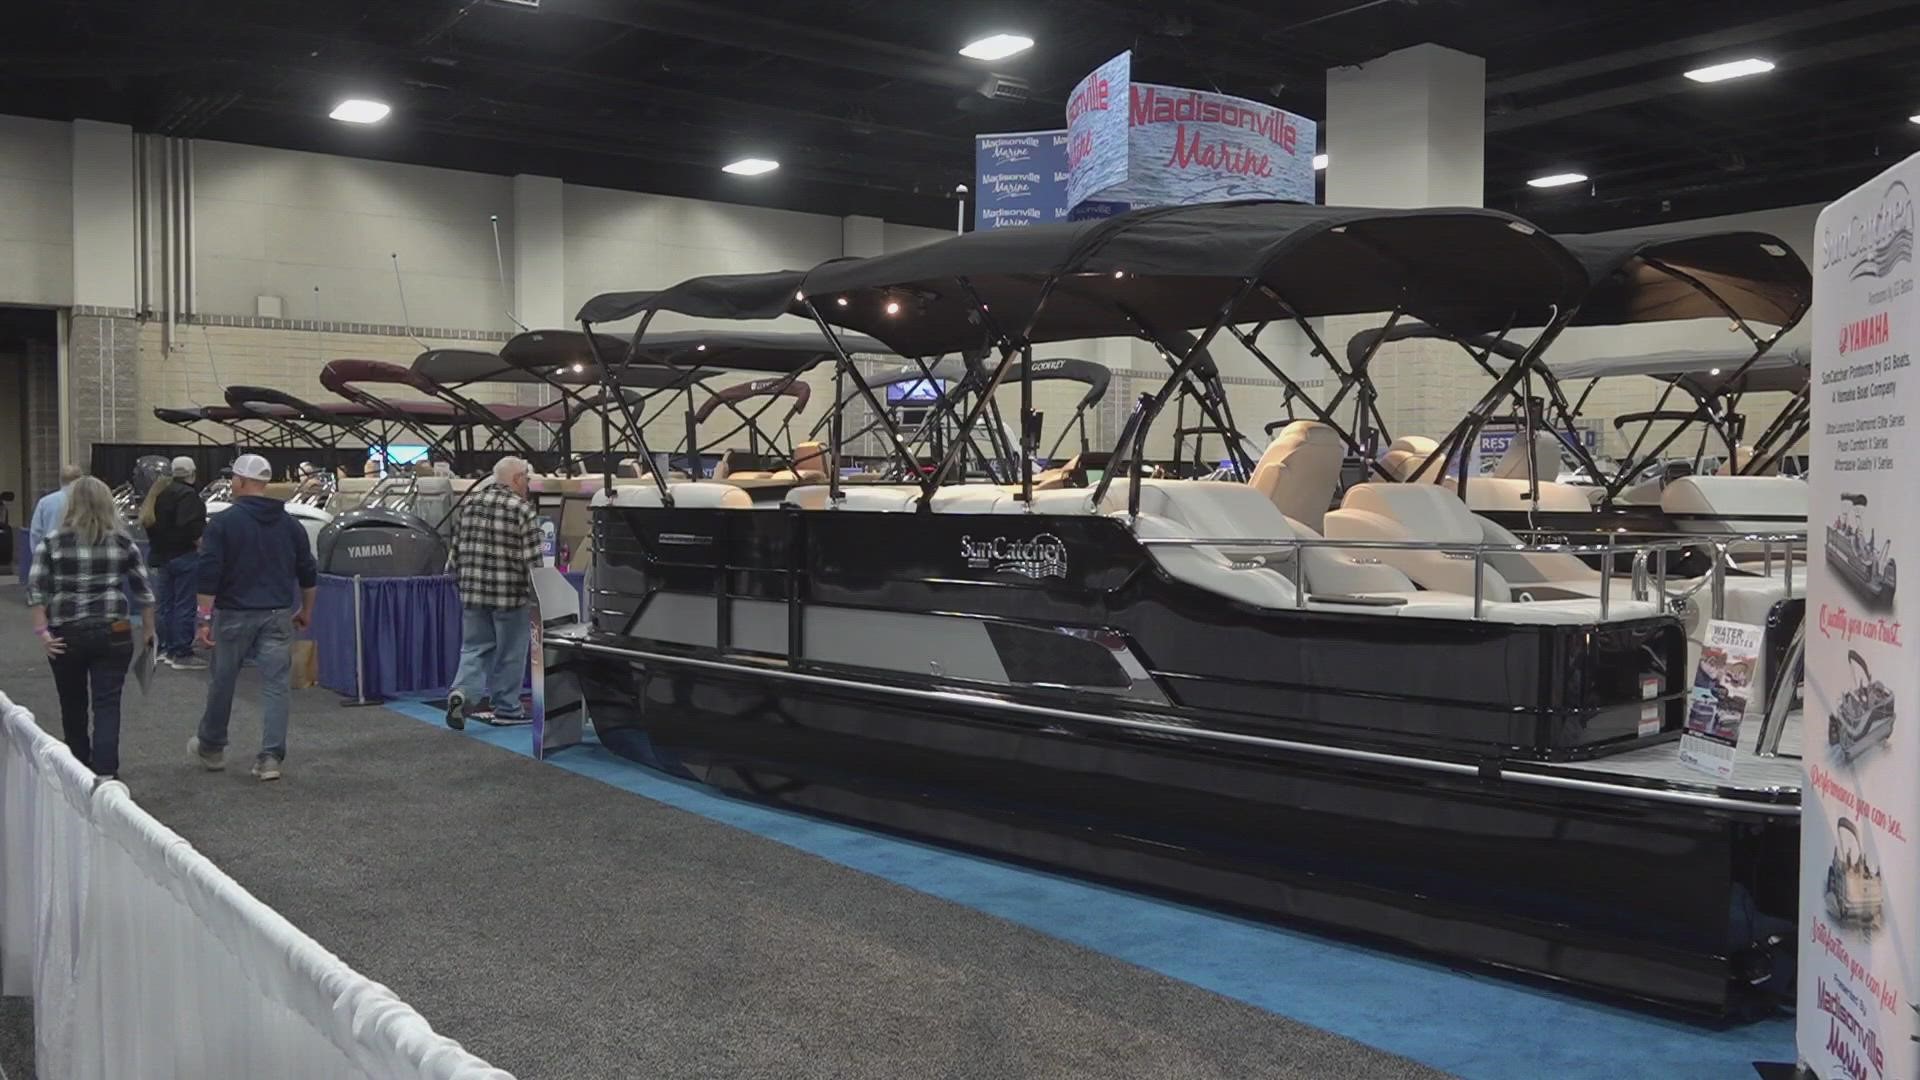 The boat show is in town! There will be jet skis and boats on display at the Knoxville Convention Center for the rest of the weekend.